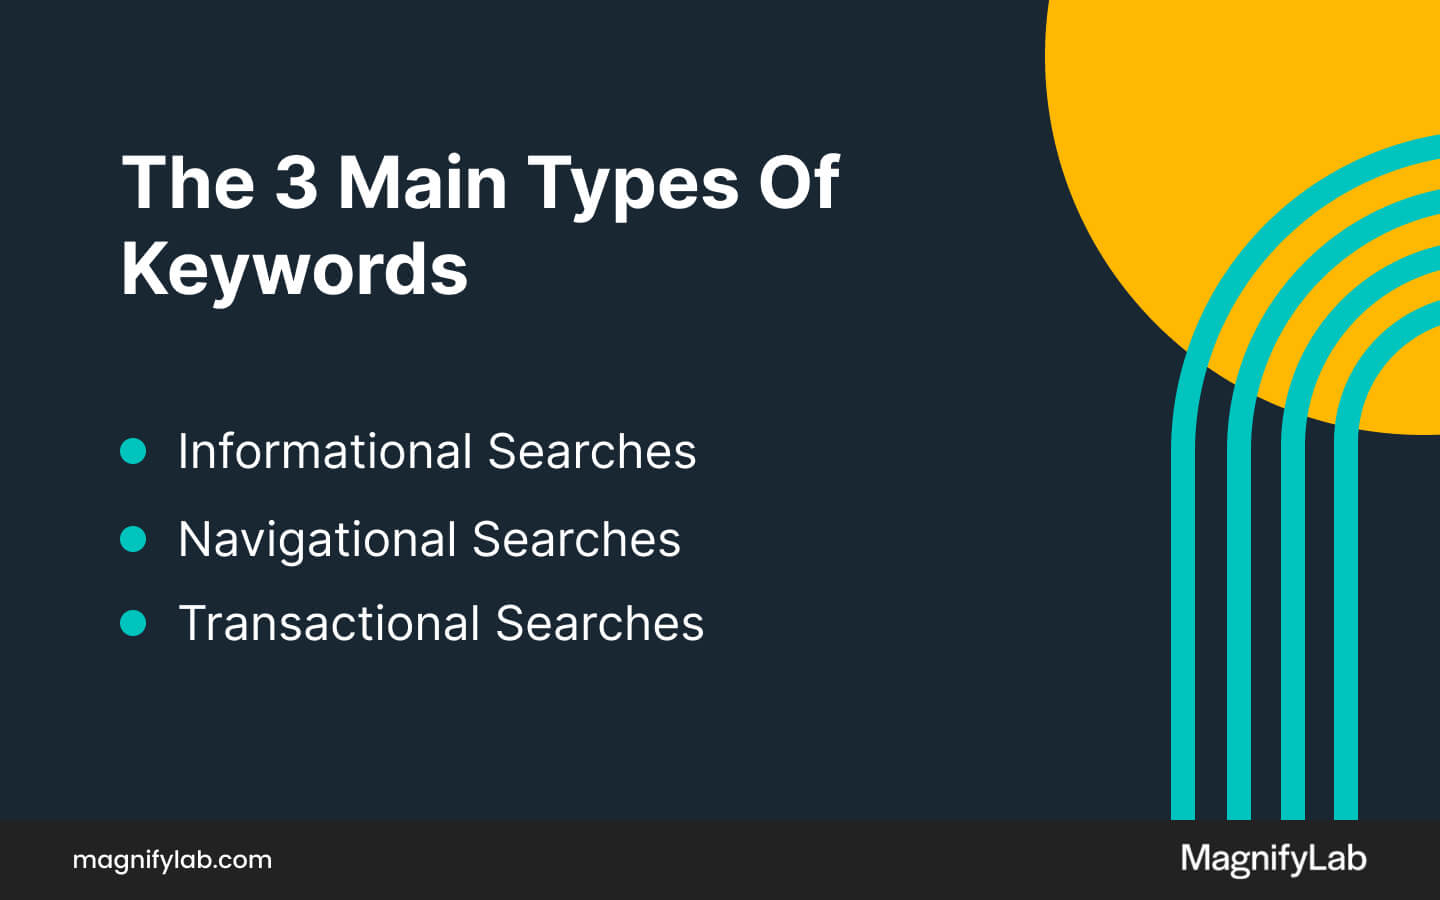 A graphic that provides a visual breakdown of the three main types of keywords crucial for law firm seo: informational searches, navigational searches, and transactional searches. This visual organisation helps law firms understand the different searcher intents behind these keyword types, guiding them in crafting SEO marketing for lawyer strategies that align with the specific needs and behaviors of their potential clients.